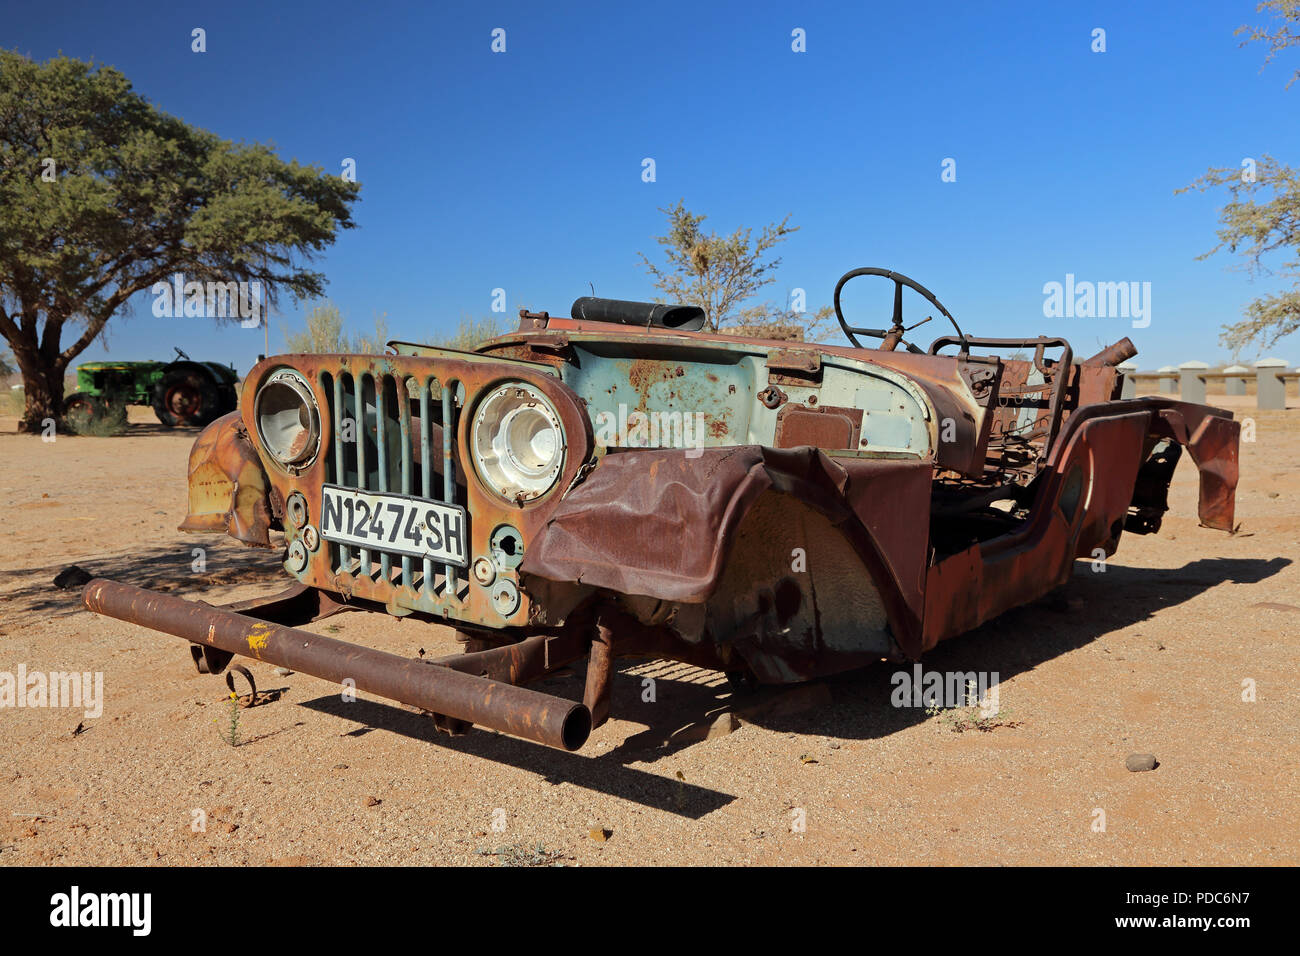 A wrecked vintage Jeep photographed at the Canyon Roadhouse, Namibia. Stock Photo